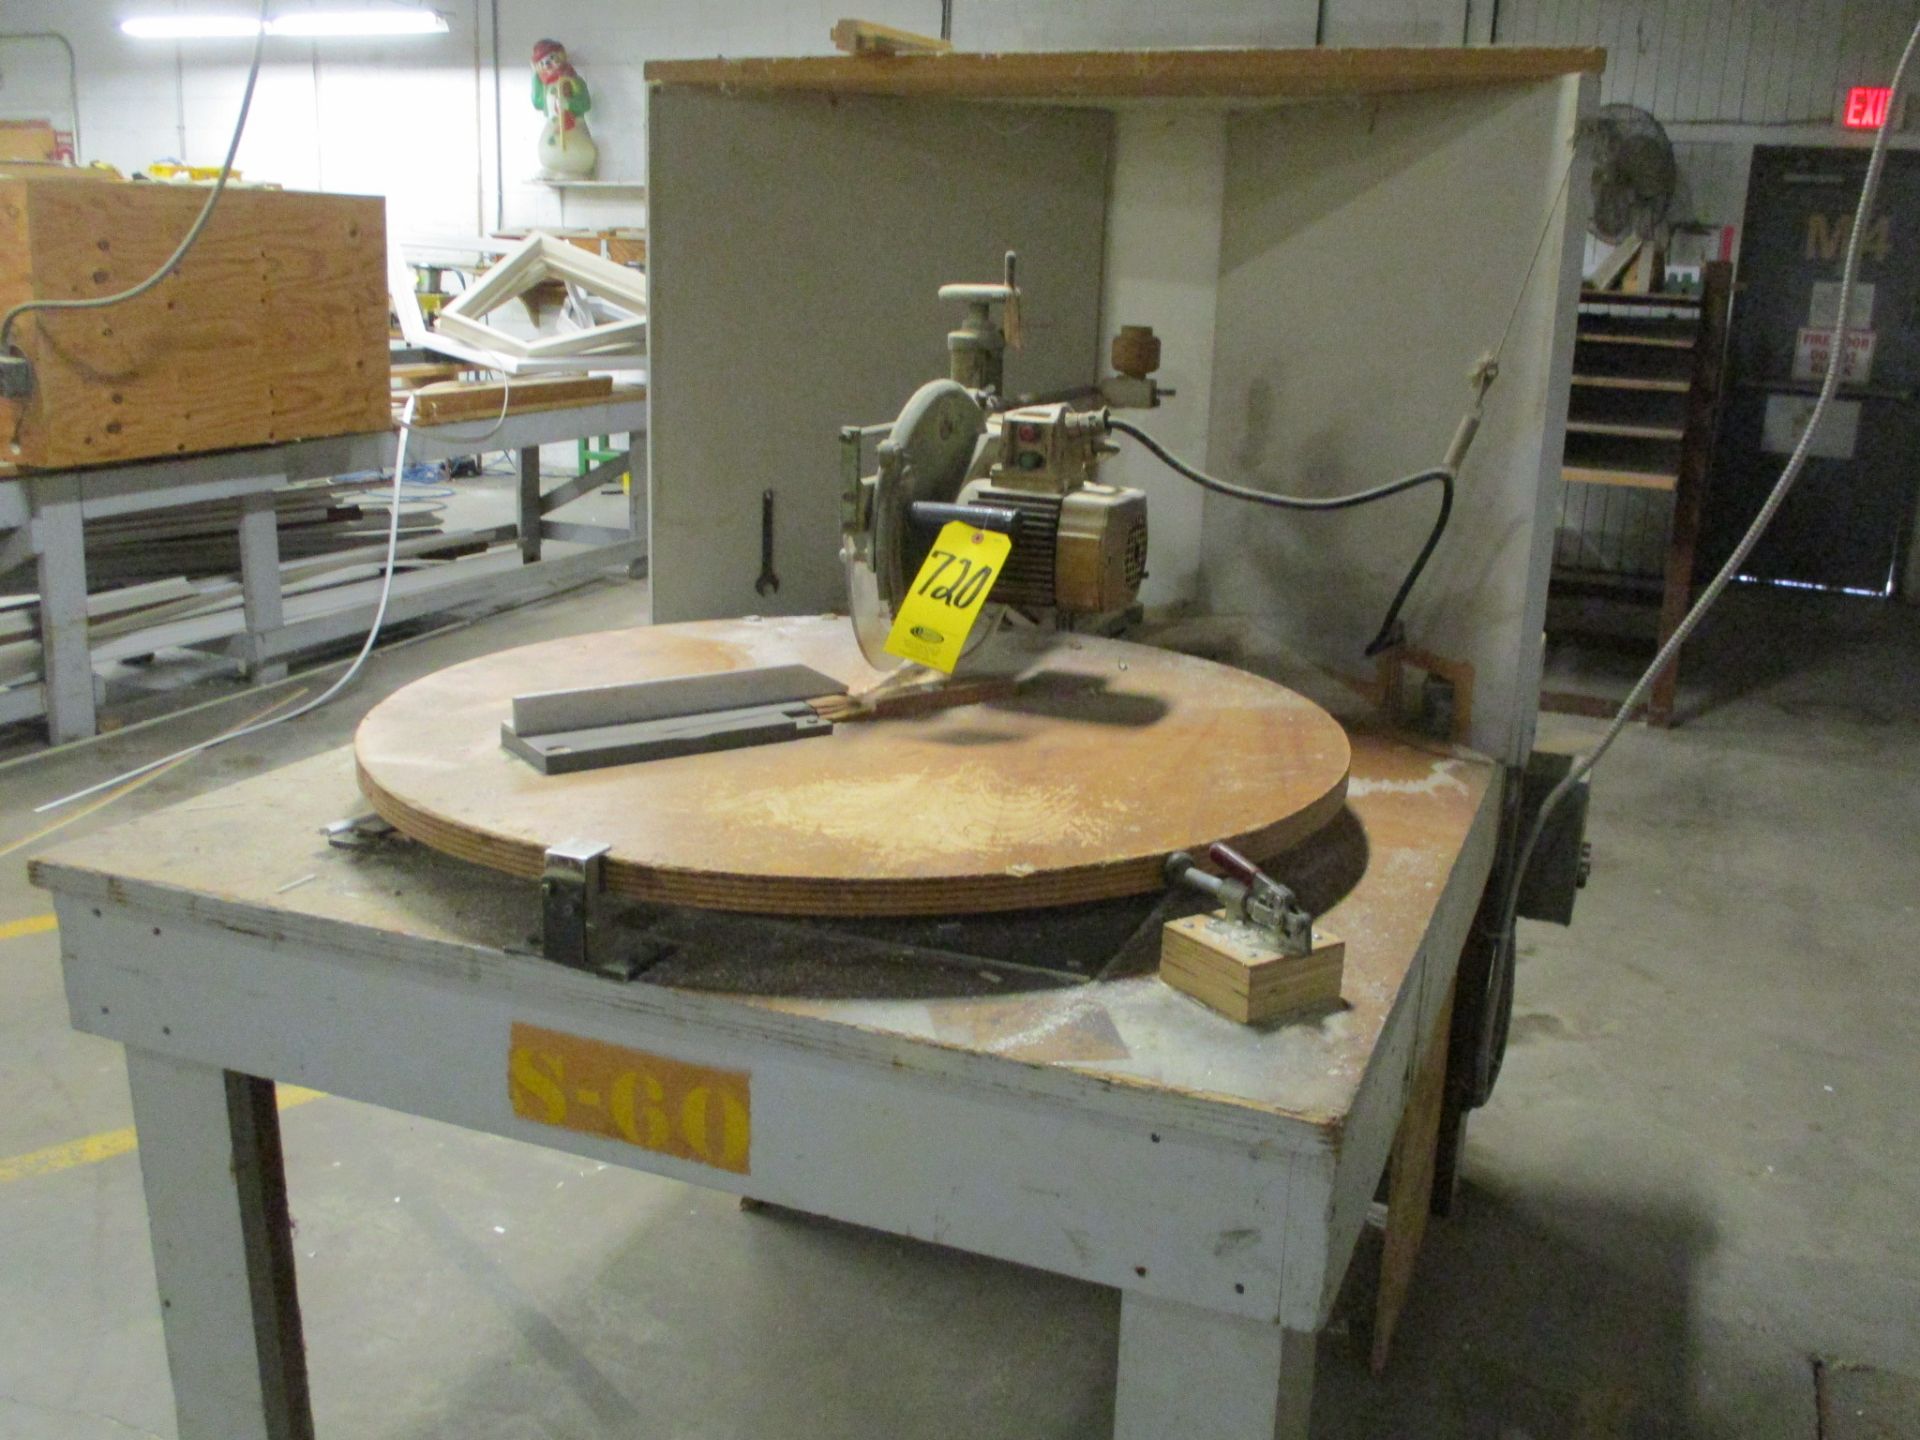 1977 Berufageno 12" Radial Saw, s/n 2/1037/77 with 40" Rotary Table